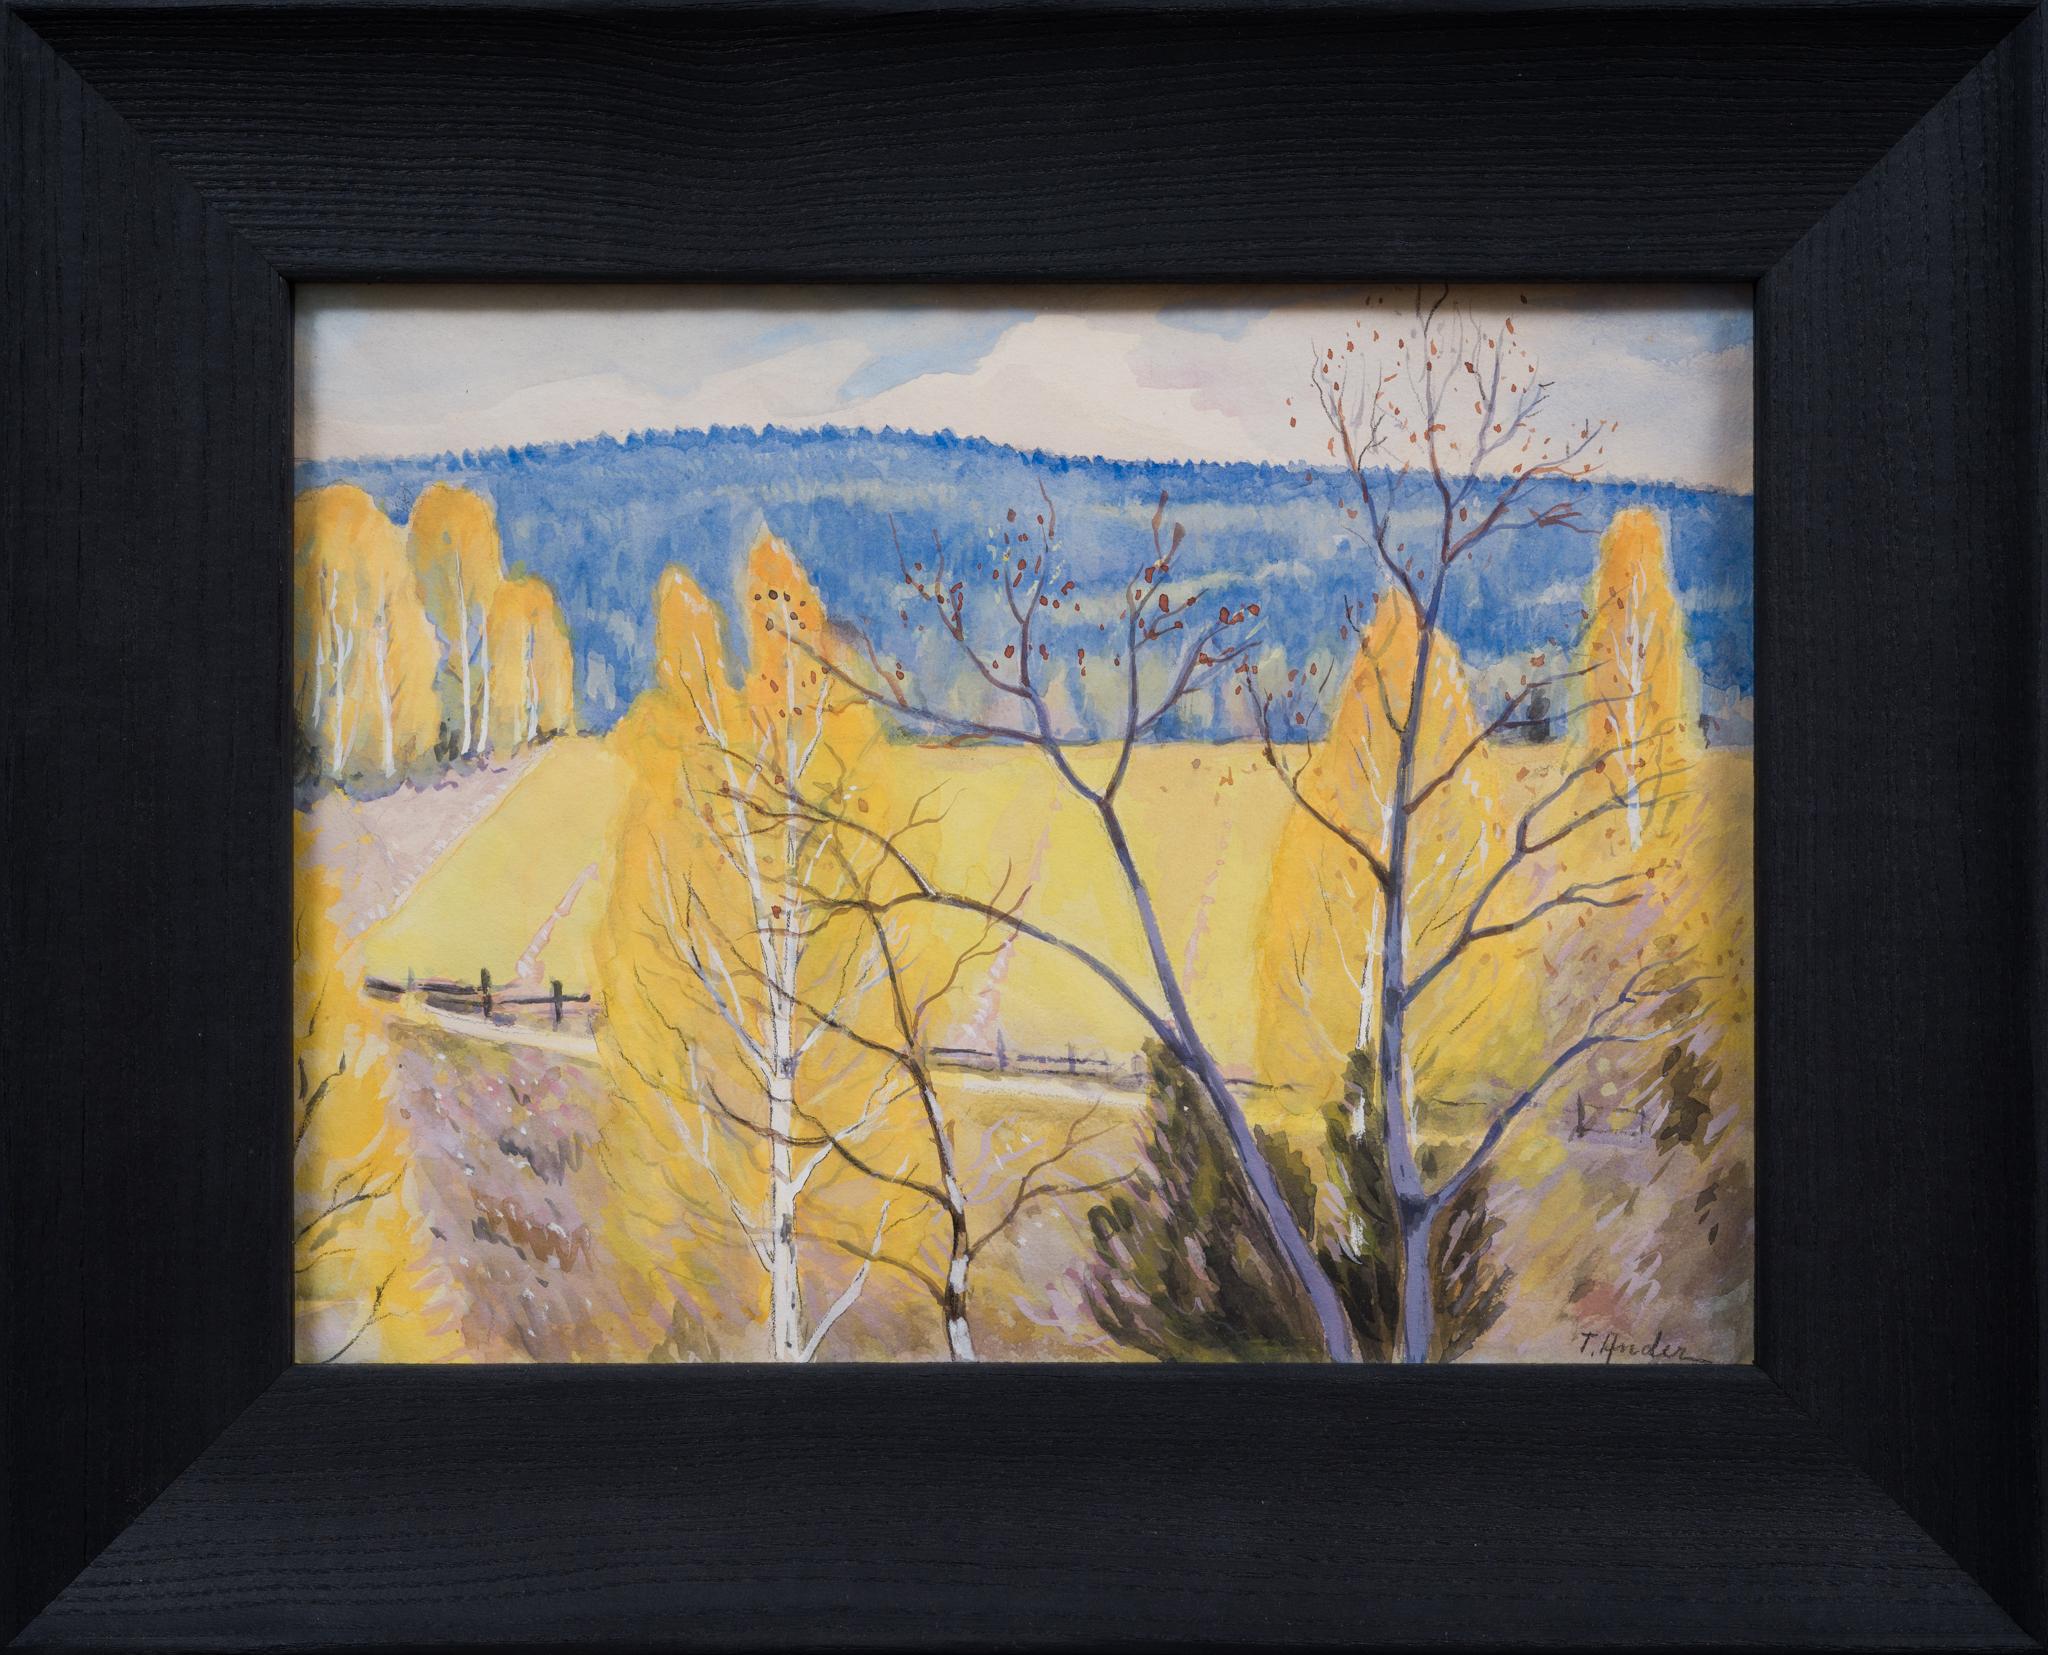 "A Värmland Landscape" is a watercolor painting by Ture Ander, an artist who was a member of the Racken Group. This artwork, incorrectly titled "Vår i Värmland, 1941" (Spring in Värmland, 1941) on its verso, actually depicts a serene autumnal scene,